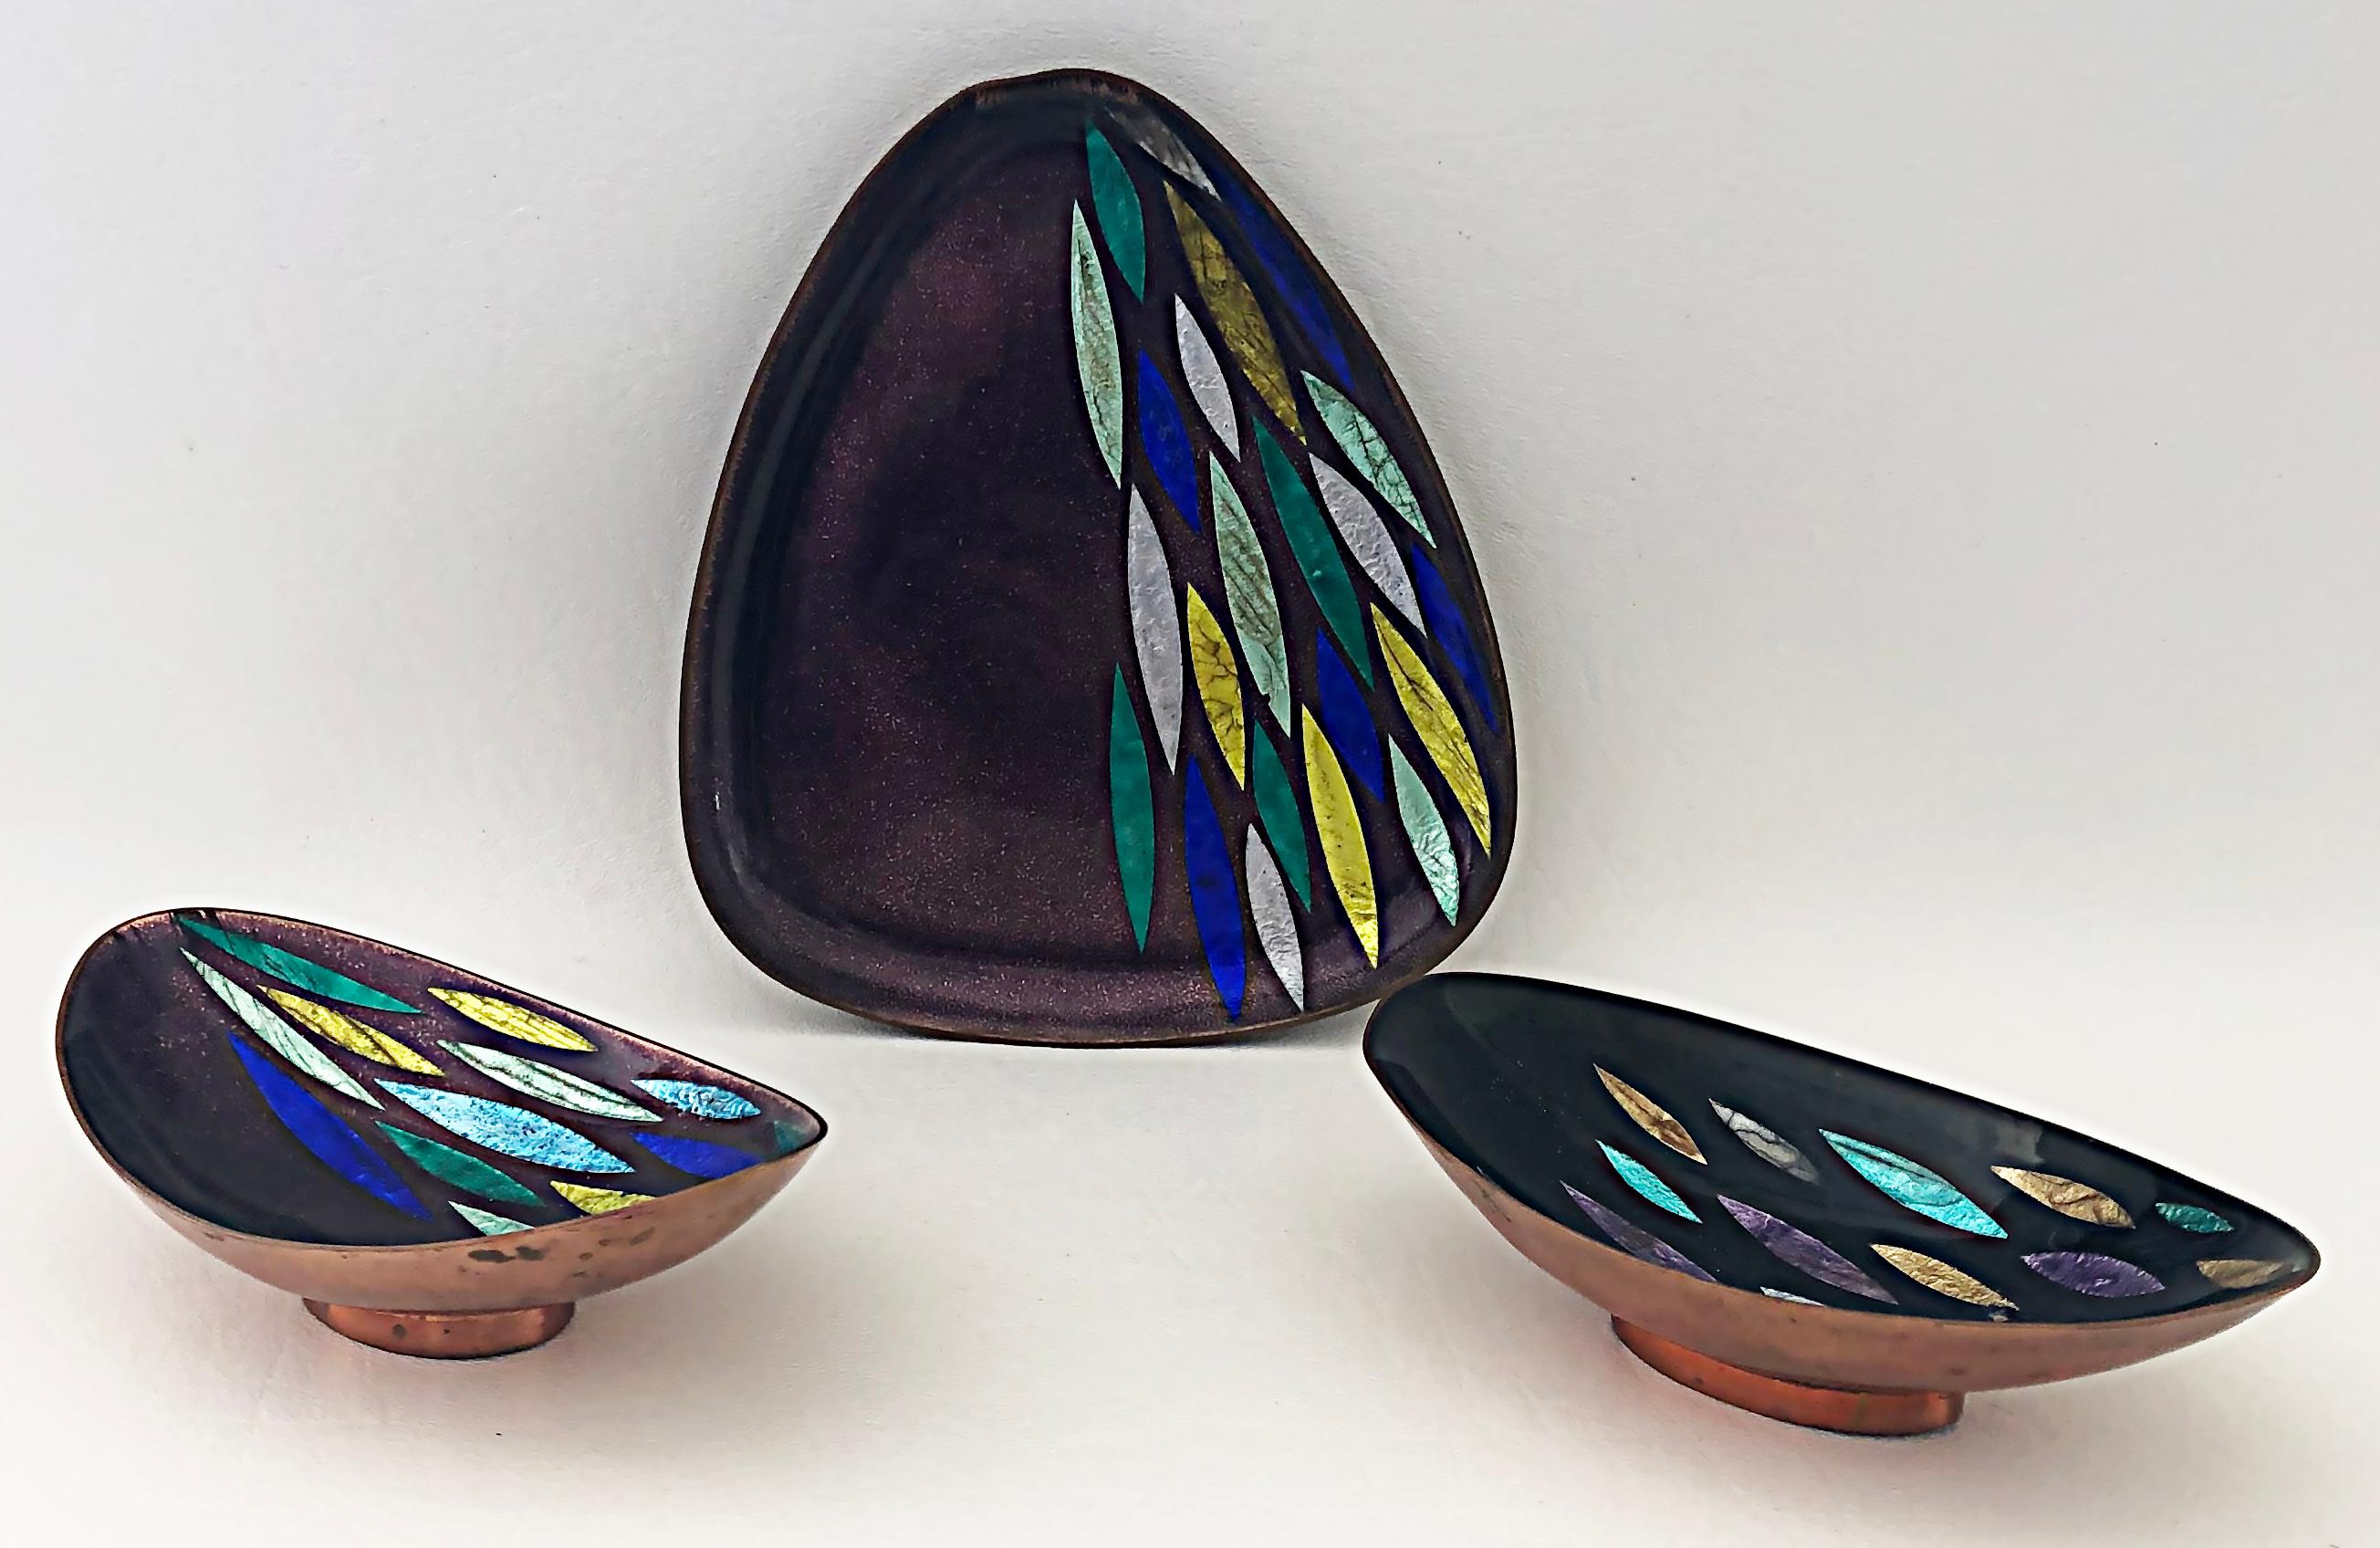 Austrian black, Starr & Gorham Enamel copper bowls, Vienna, Set of 3

Offered for sale is a set of three Black Starr & Gorham enameled copper bowls. They are designed in oval and triangular shapes with soft rounded edges and are embellished with